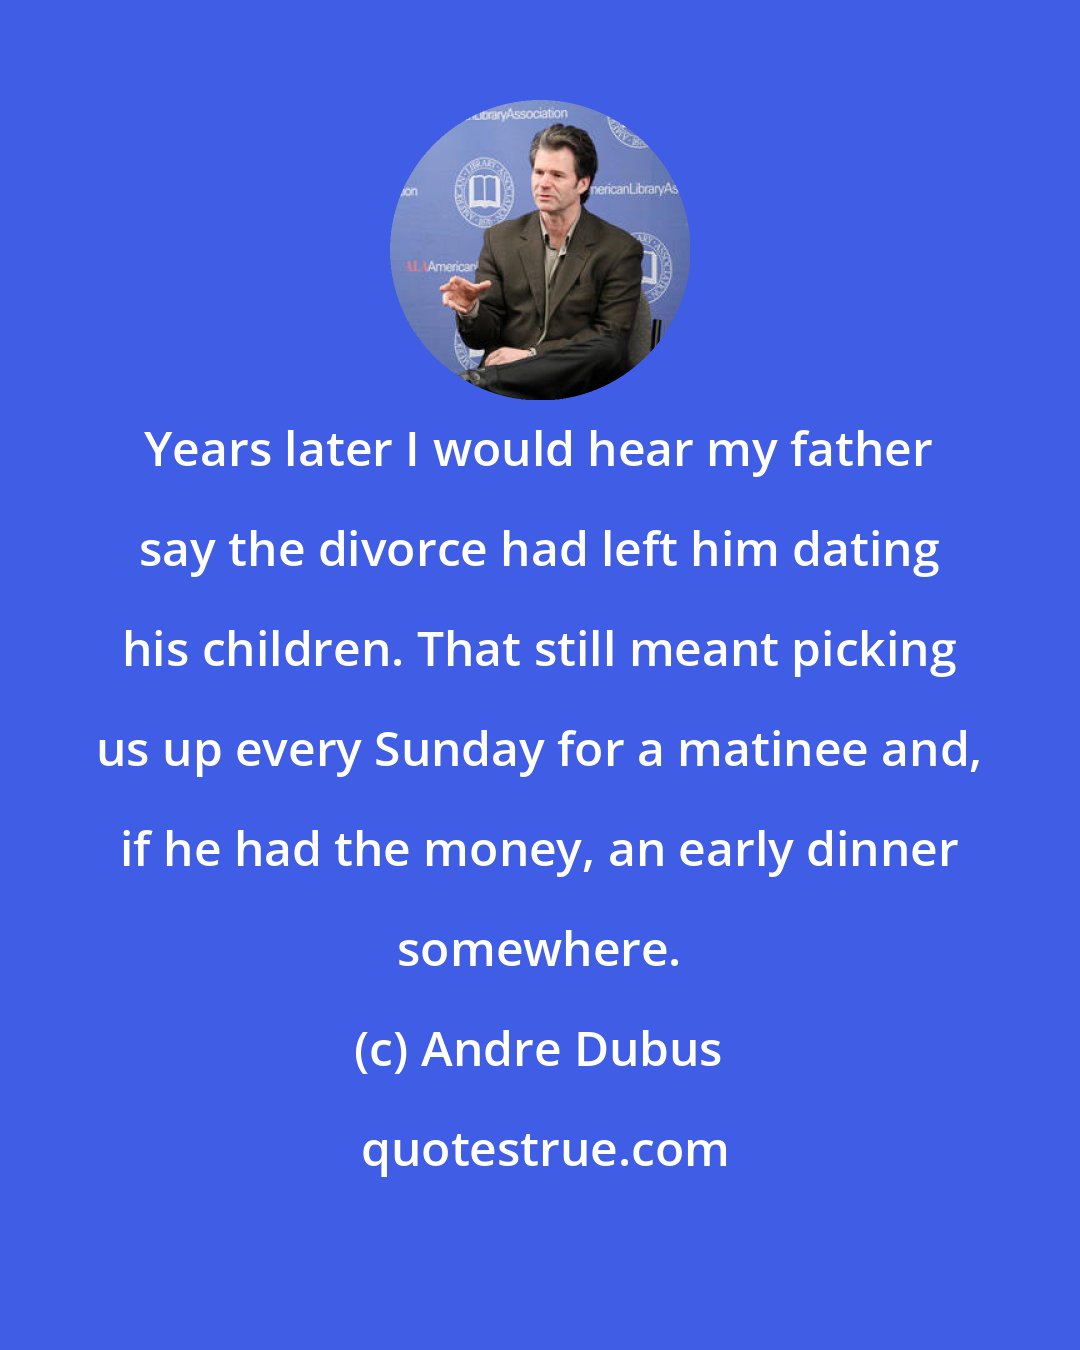 Andre Dubus: Years later I would hear my father say the divorce had left him dating his children. That still meant picking us up every Sunday for a matinee and, if he had the money, an early dinner somewhere.